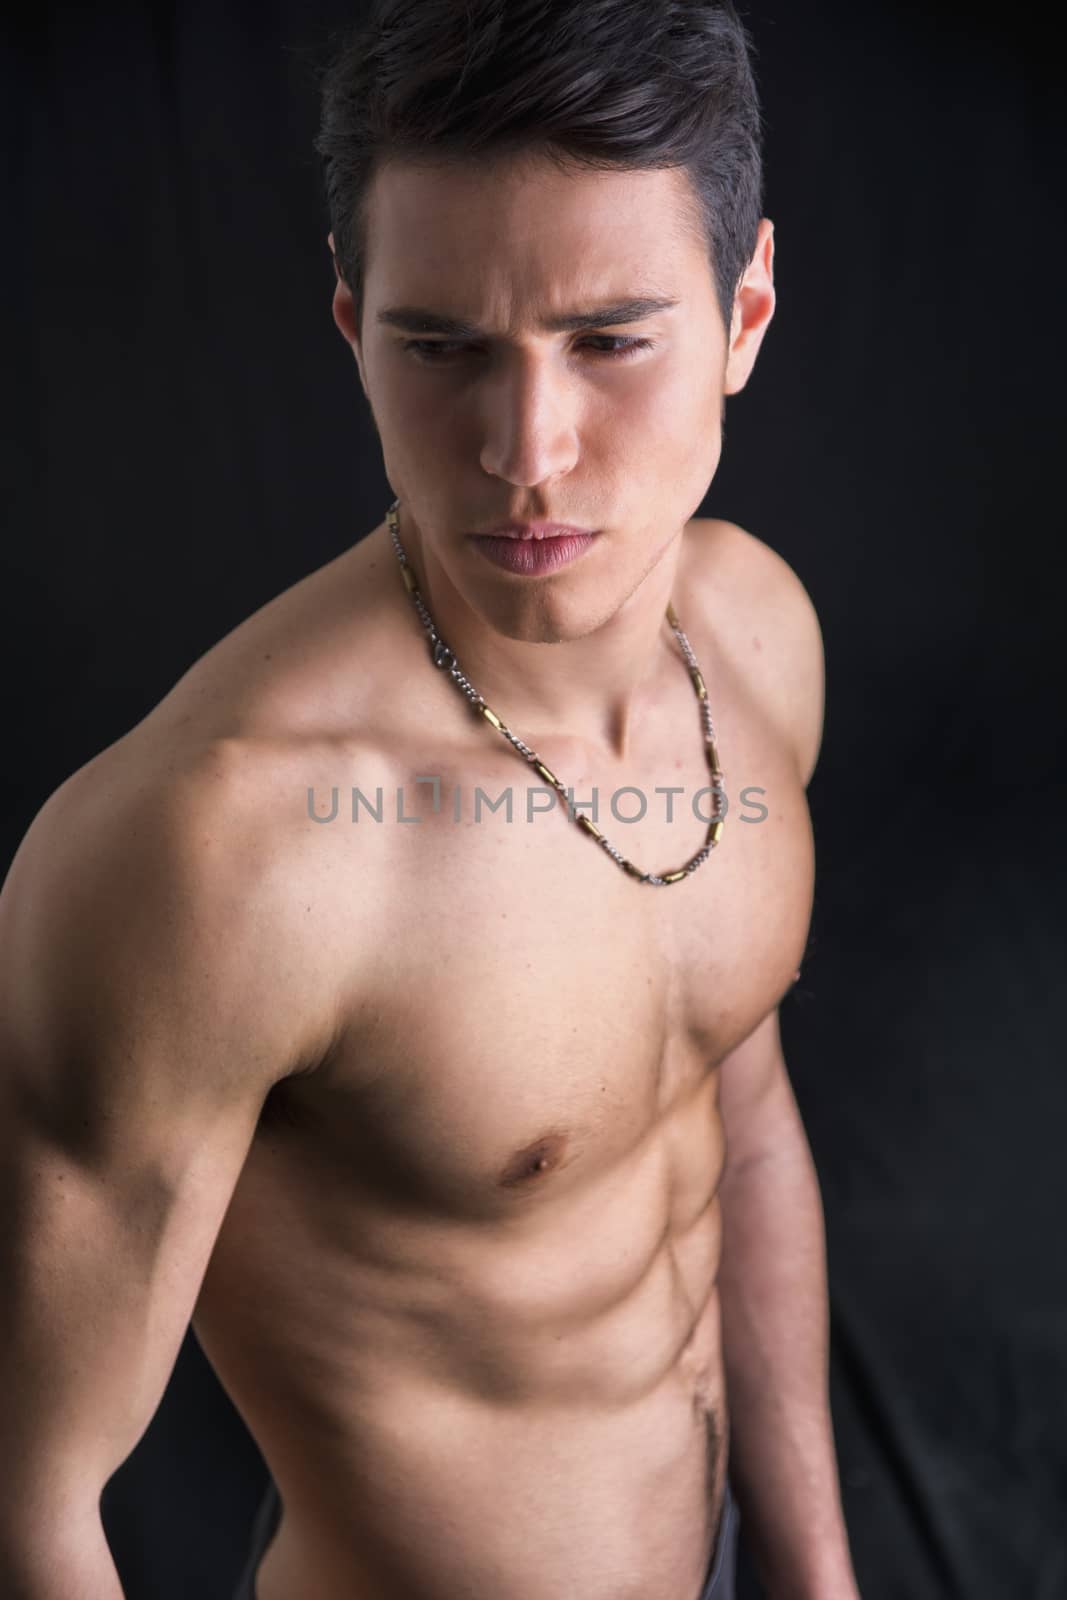 Handsome, fit young man wearing only underwear standing on black background, looking away